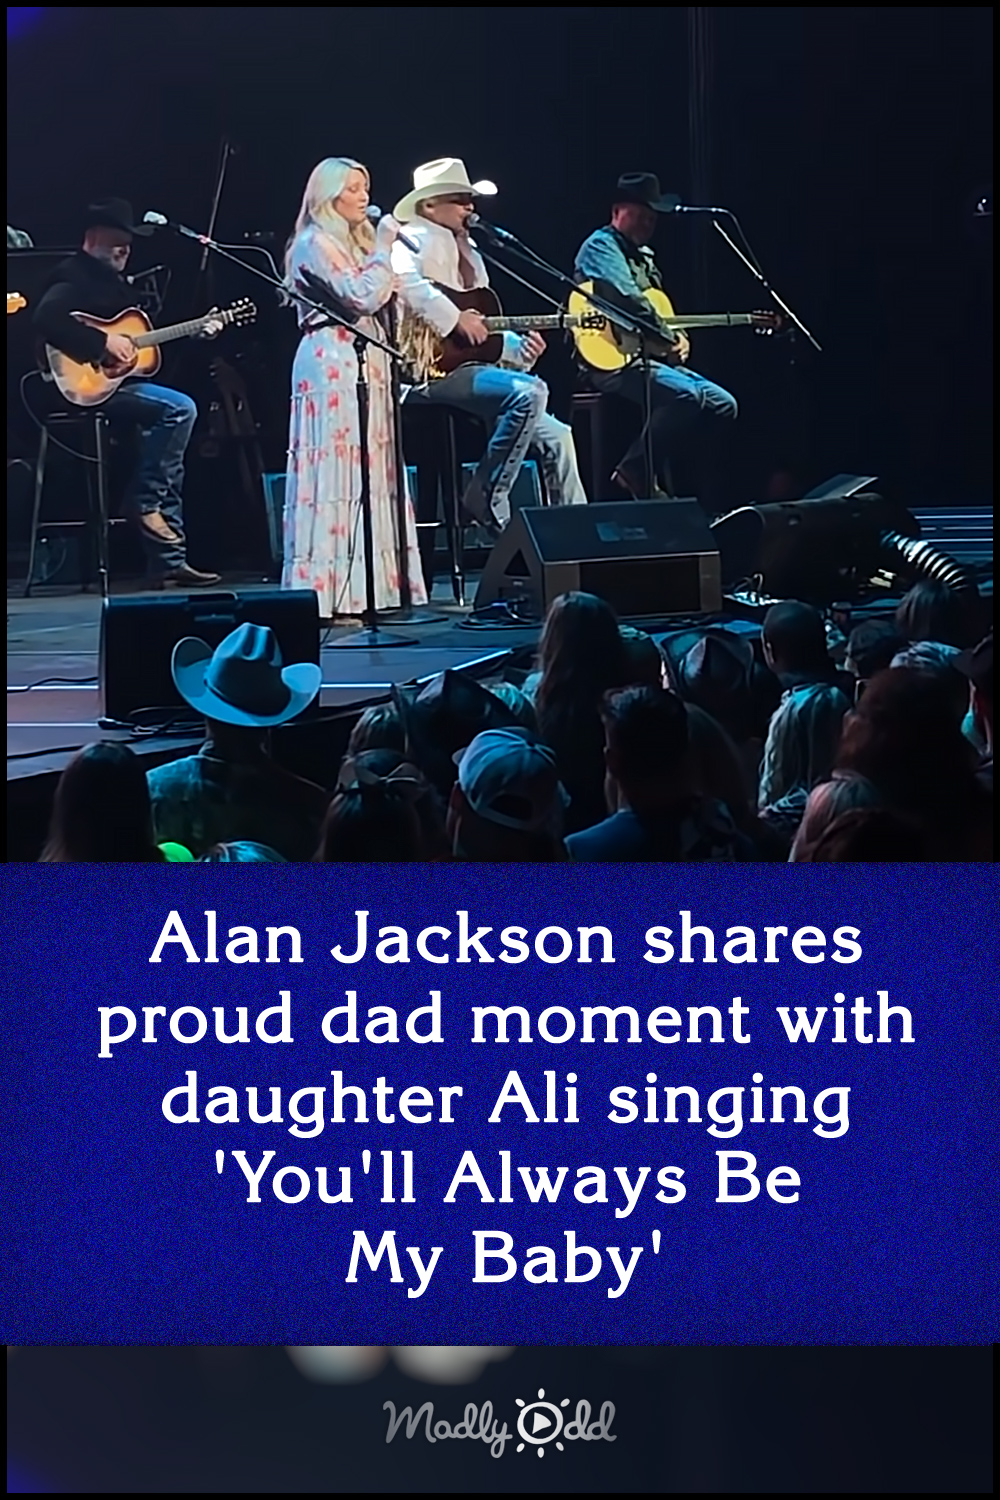 Alan Jackson shares proud dad moment with daughter Ali singing \'You\'ll Always Be My Baby\'